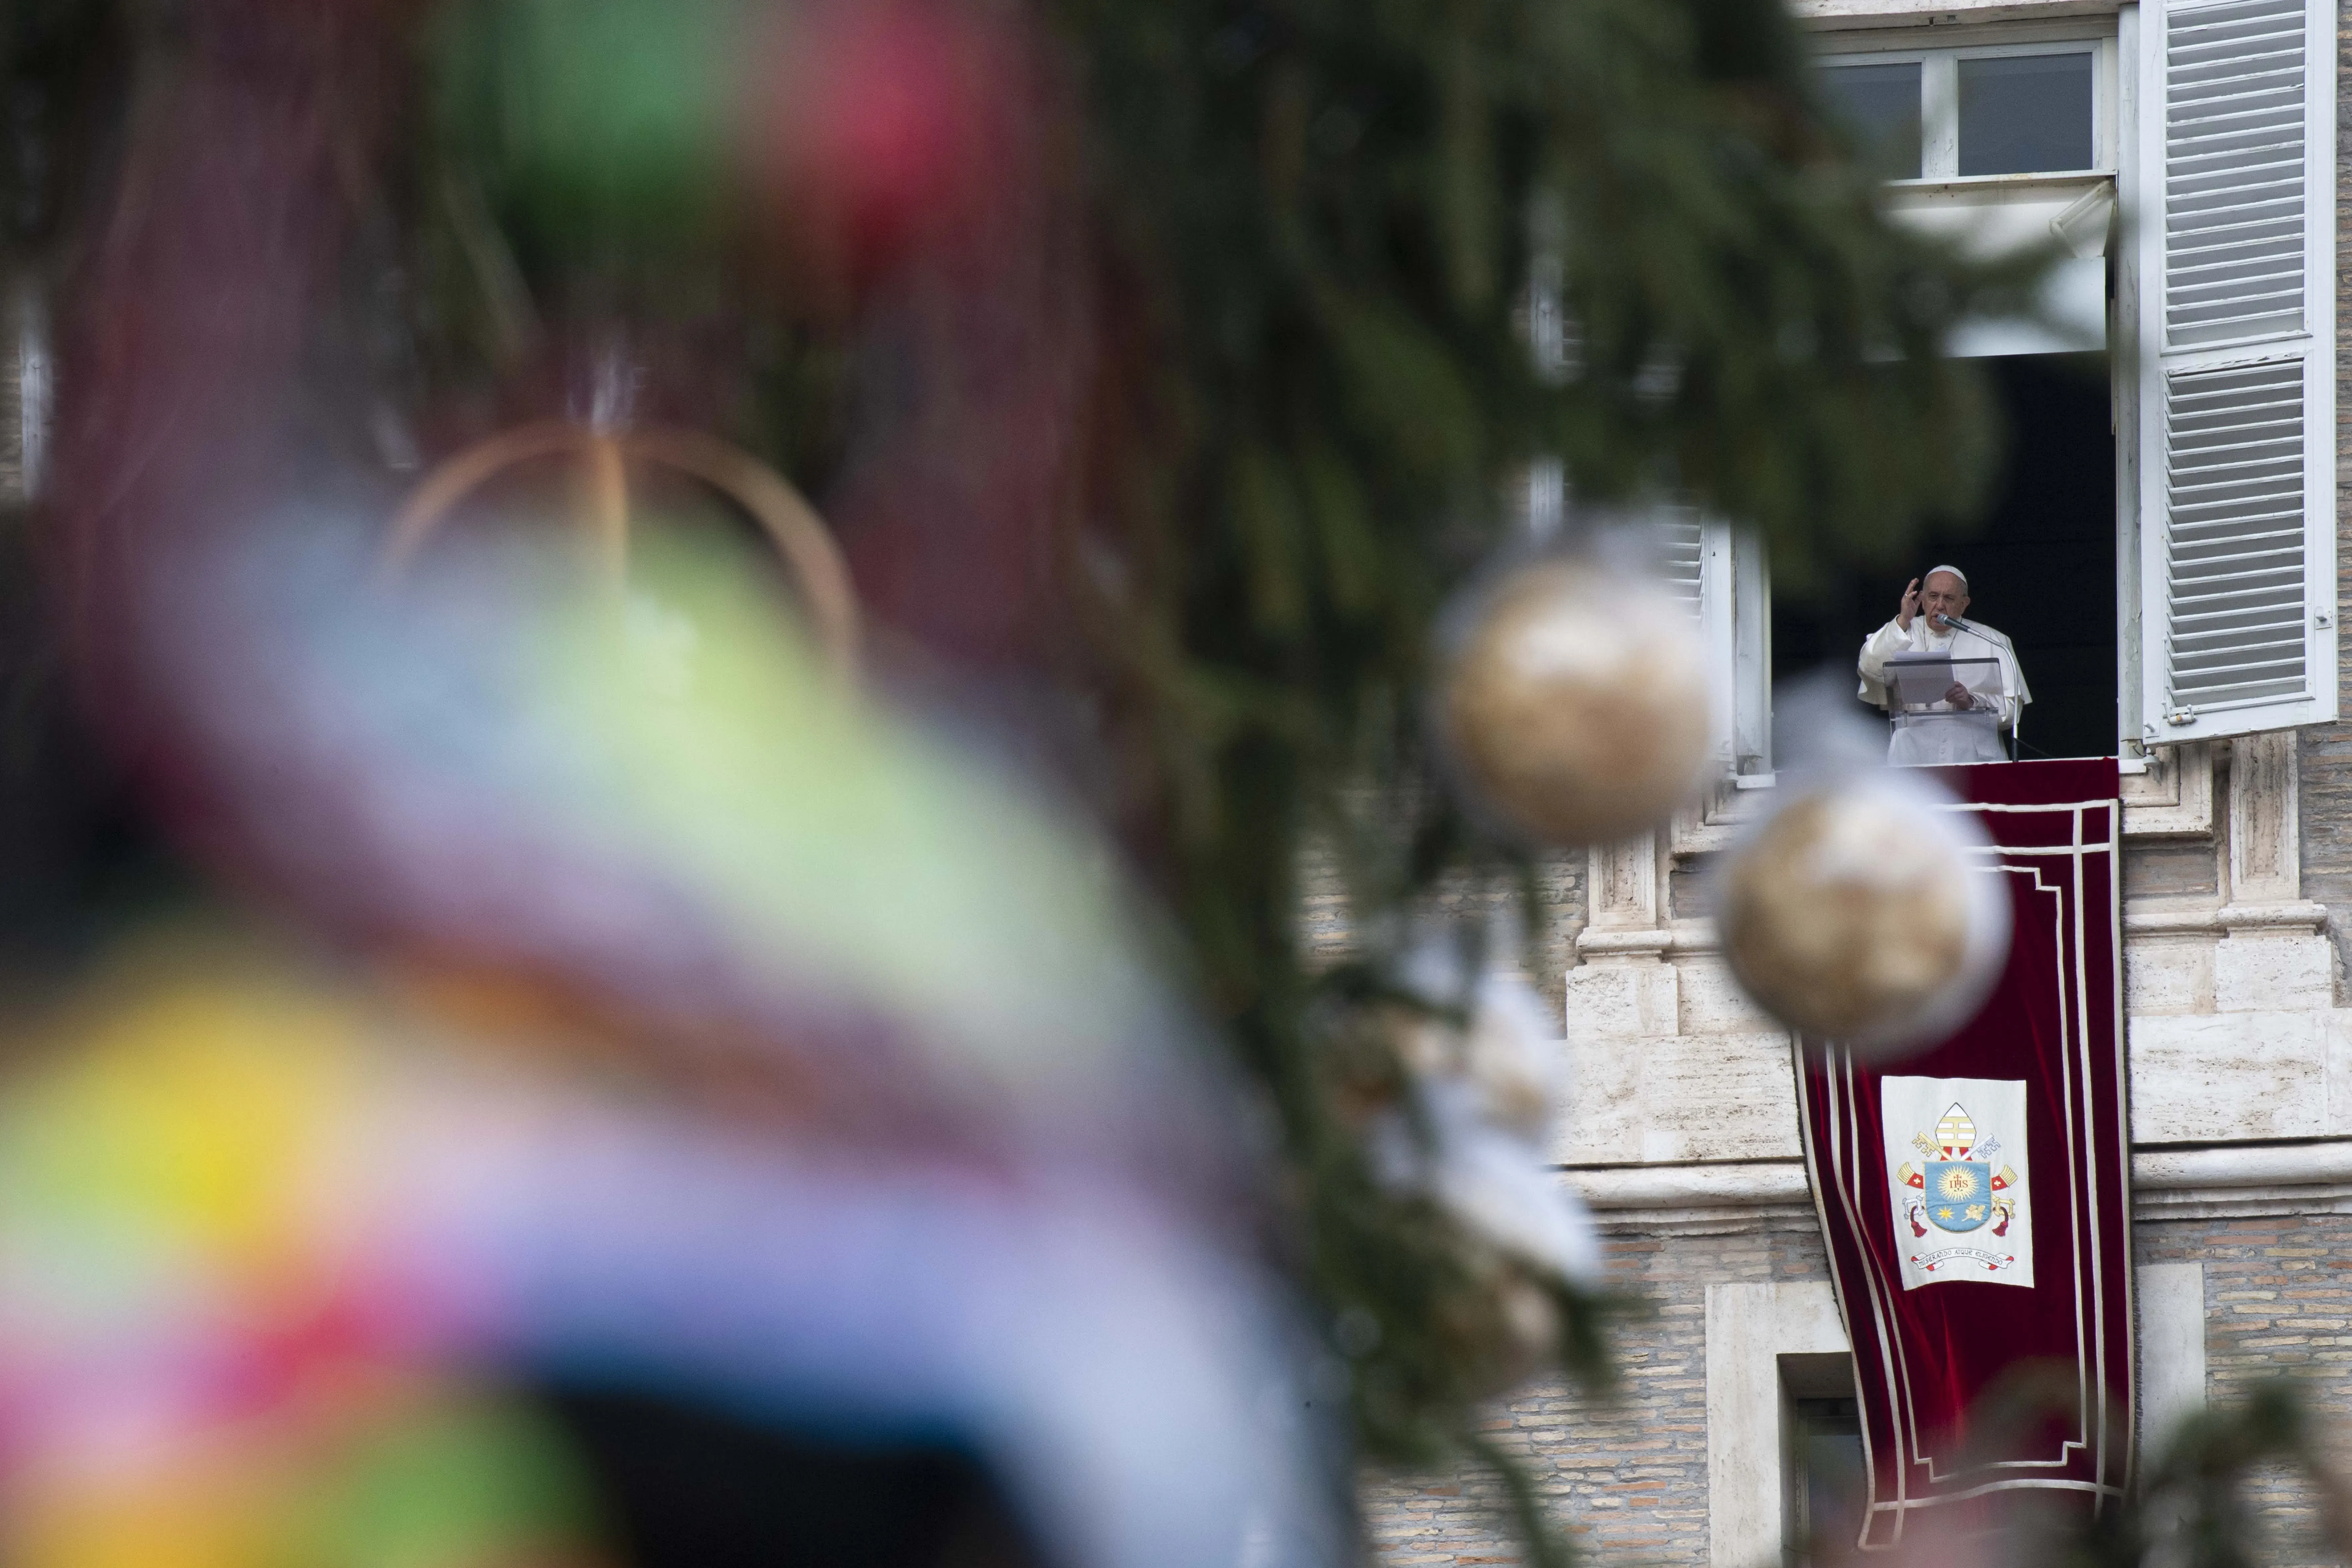 Pope Francis gives his Angelus address on Dec. 26, 2021. Vatican News